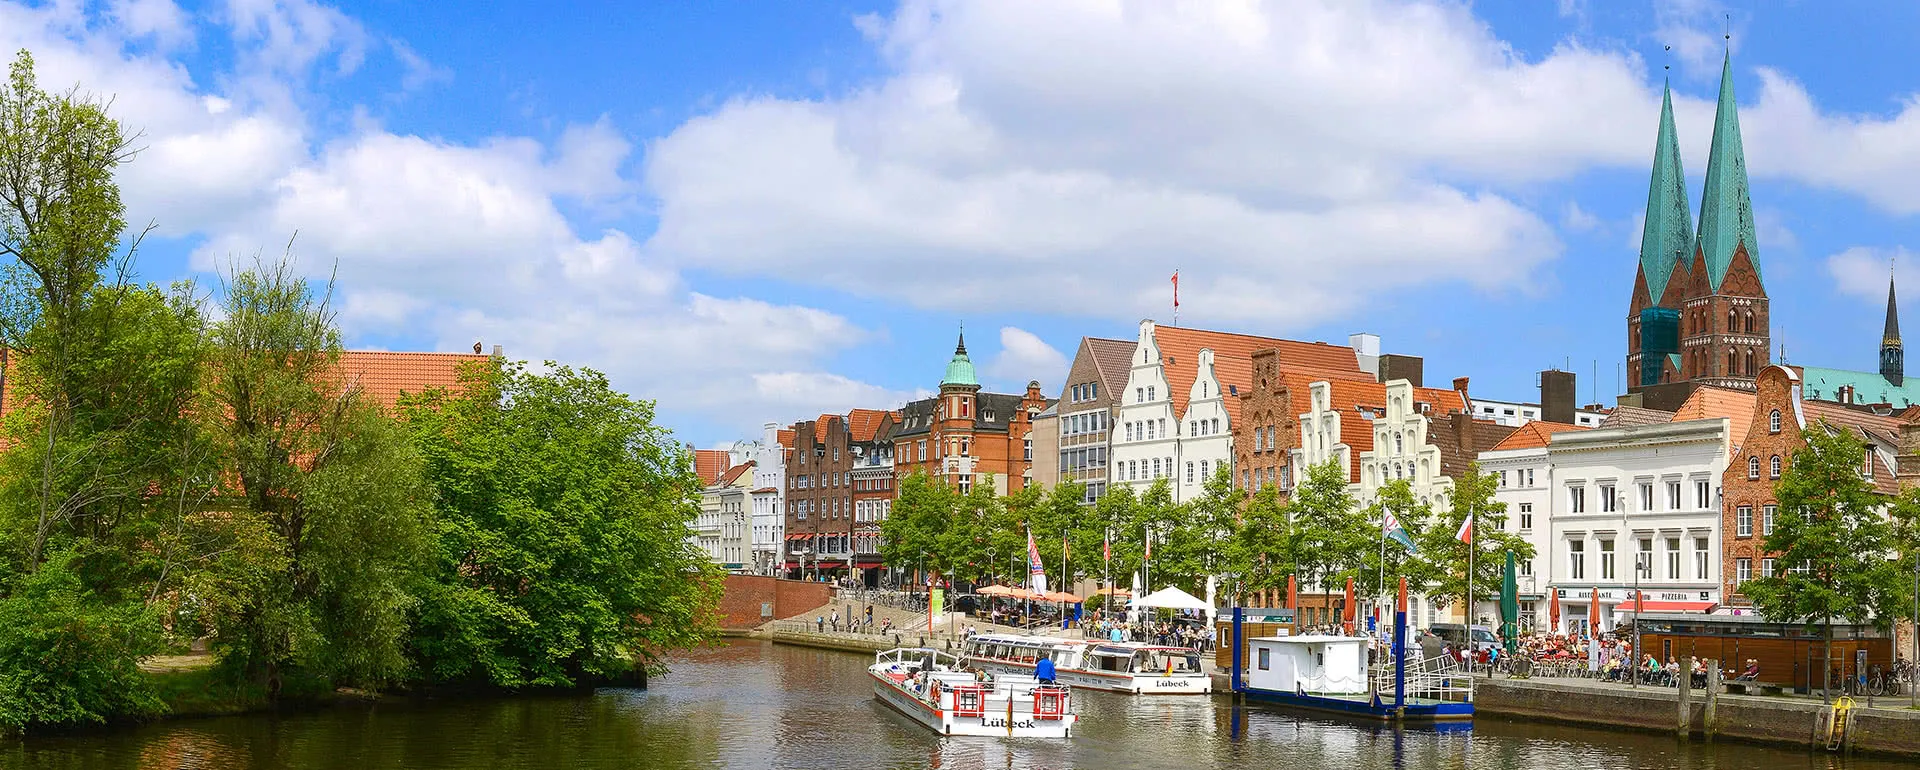 Luebeck - the destination for business travel